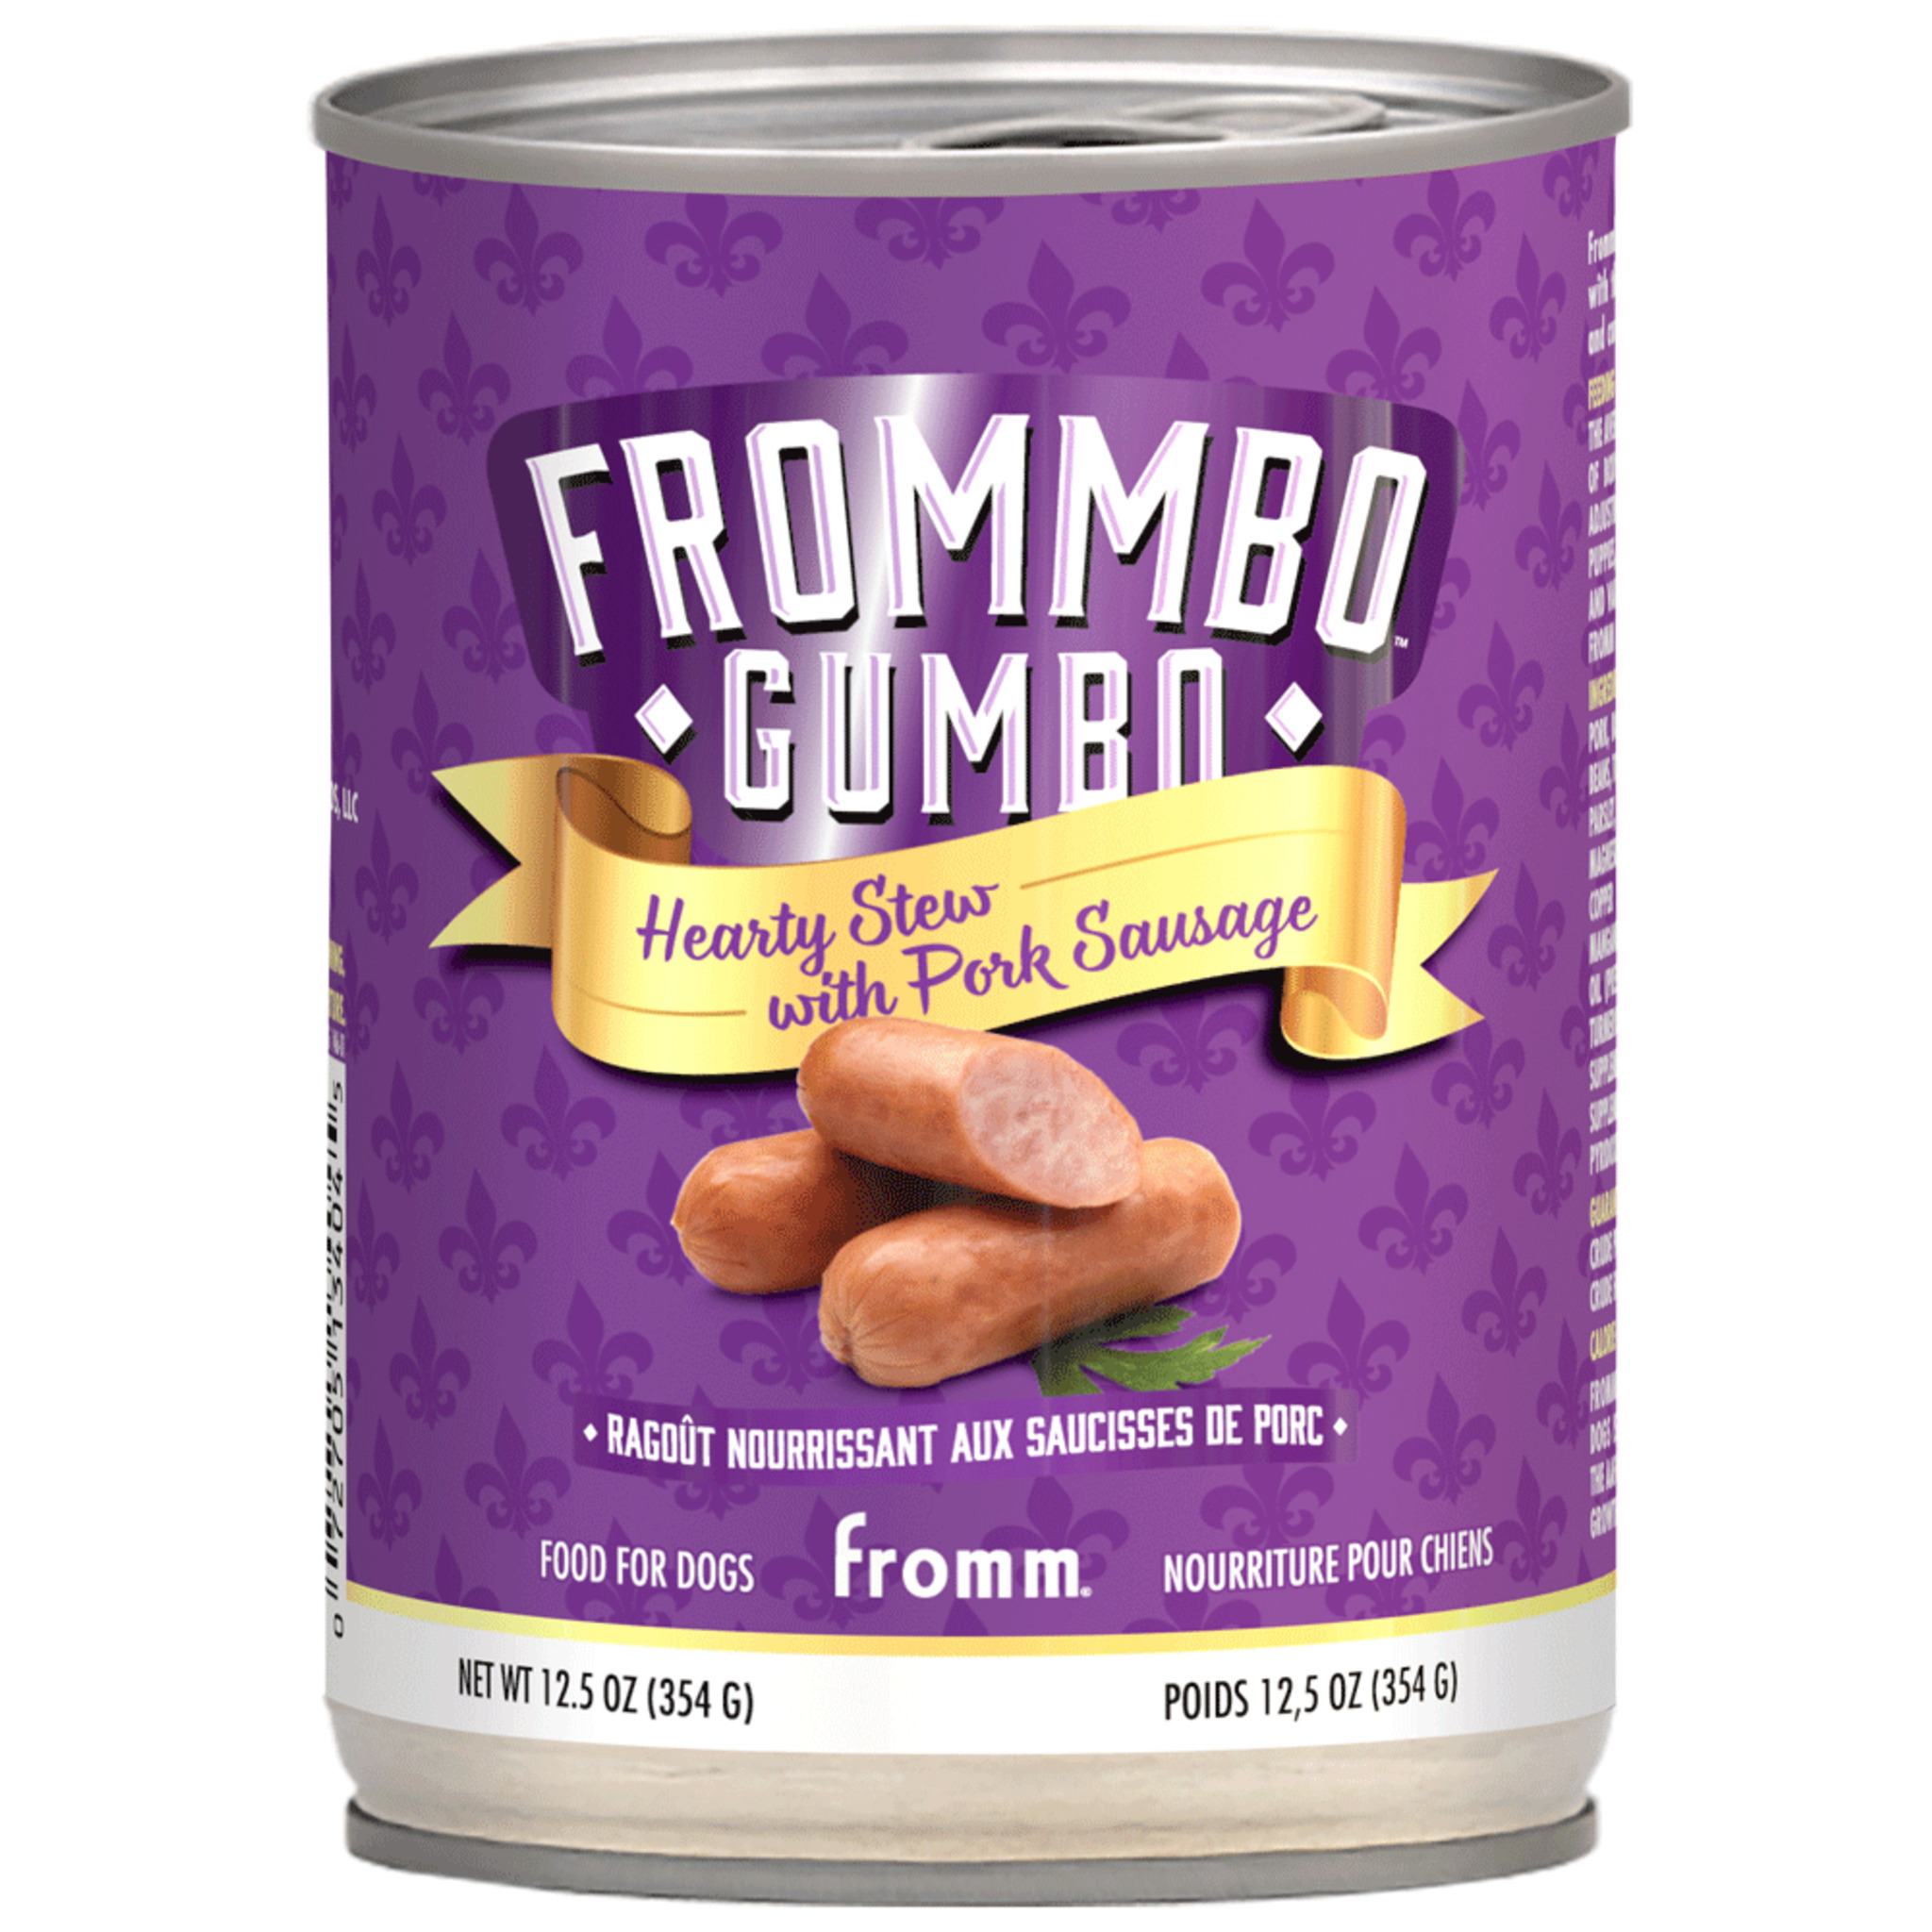 Fromm Frommbo Gumbo Pork Sausage Stew Dog Food 12.5 oz